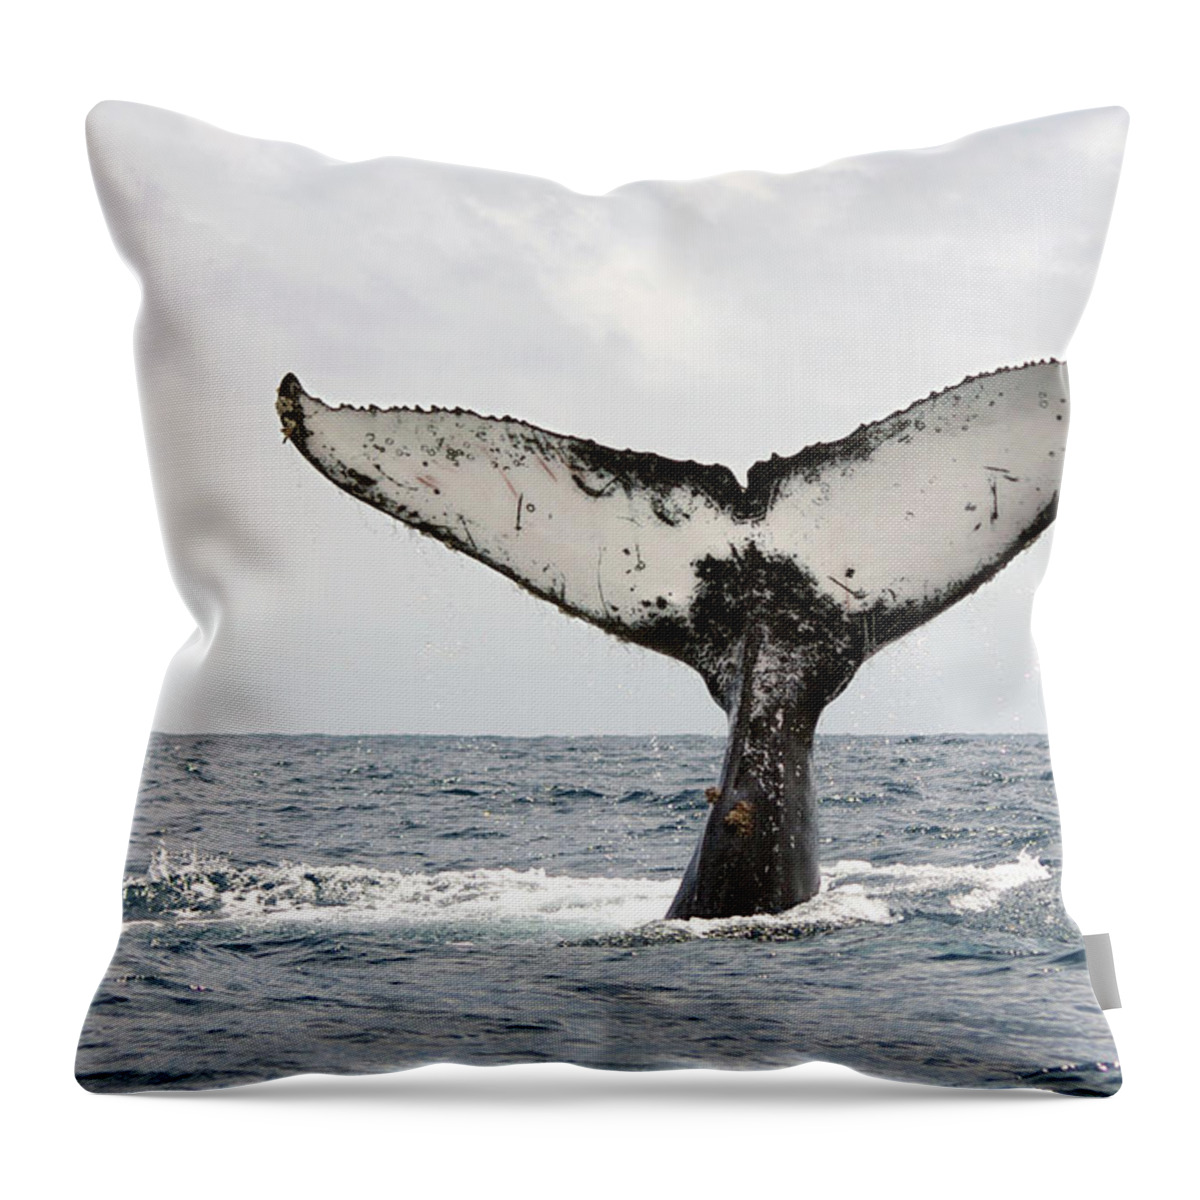 Animal Themes Throw Pillow featuring the photograph Humpback Whale Tail by Photography By Jessie Reeder